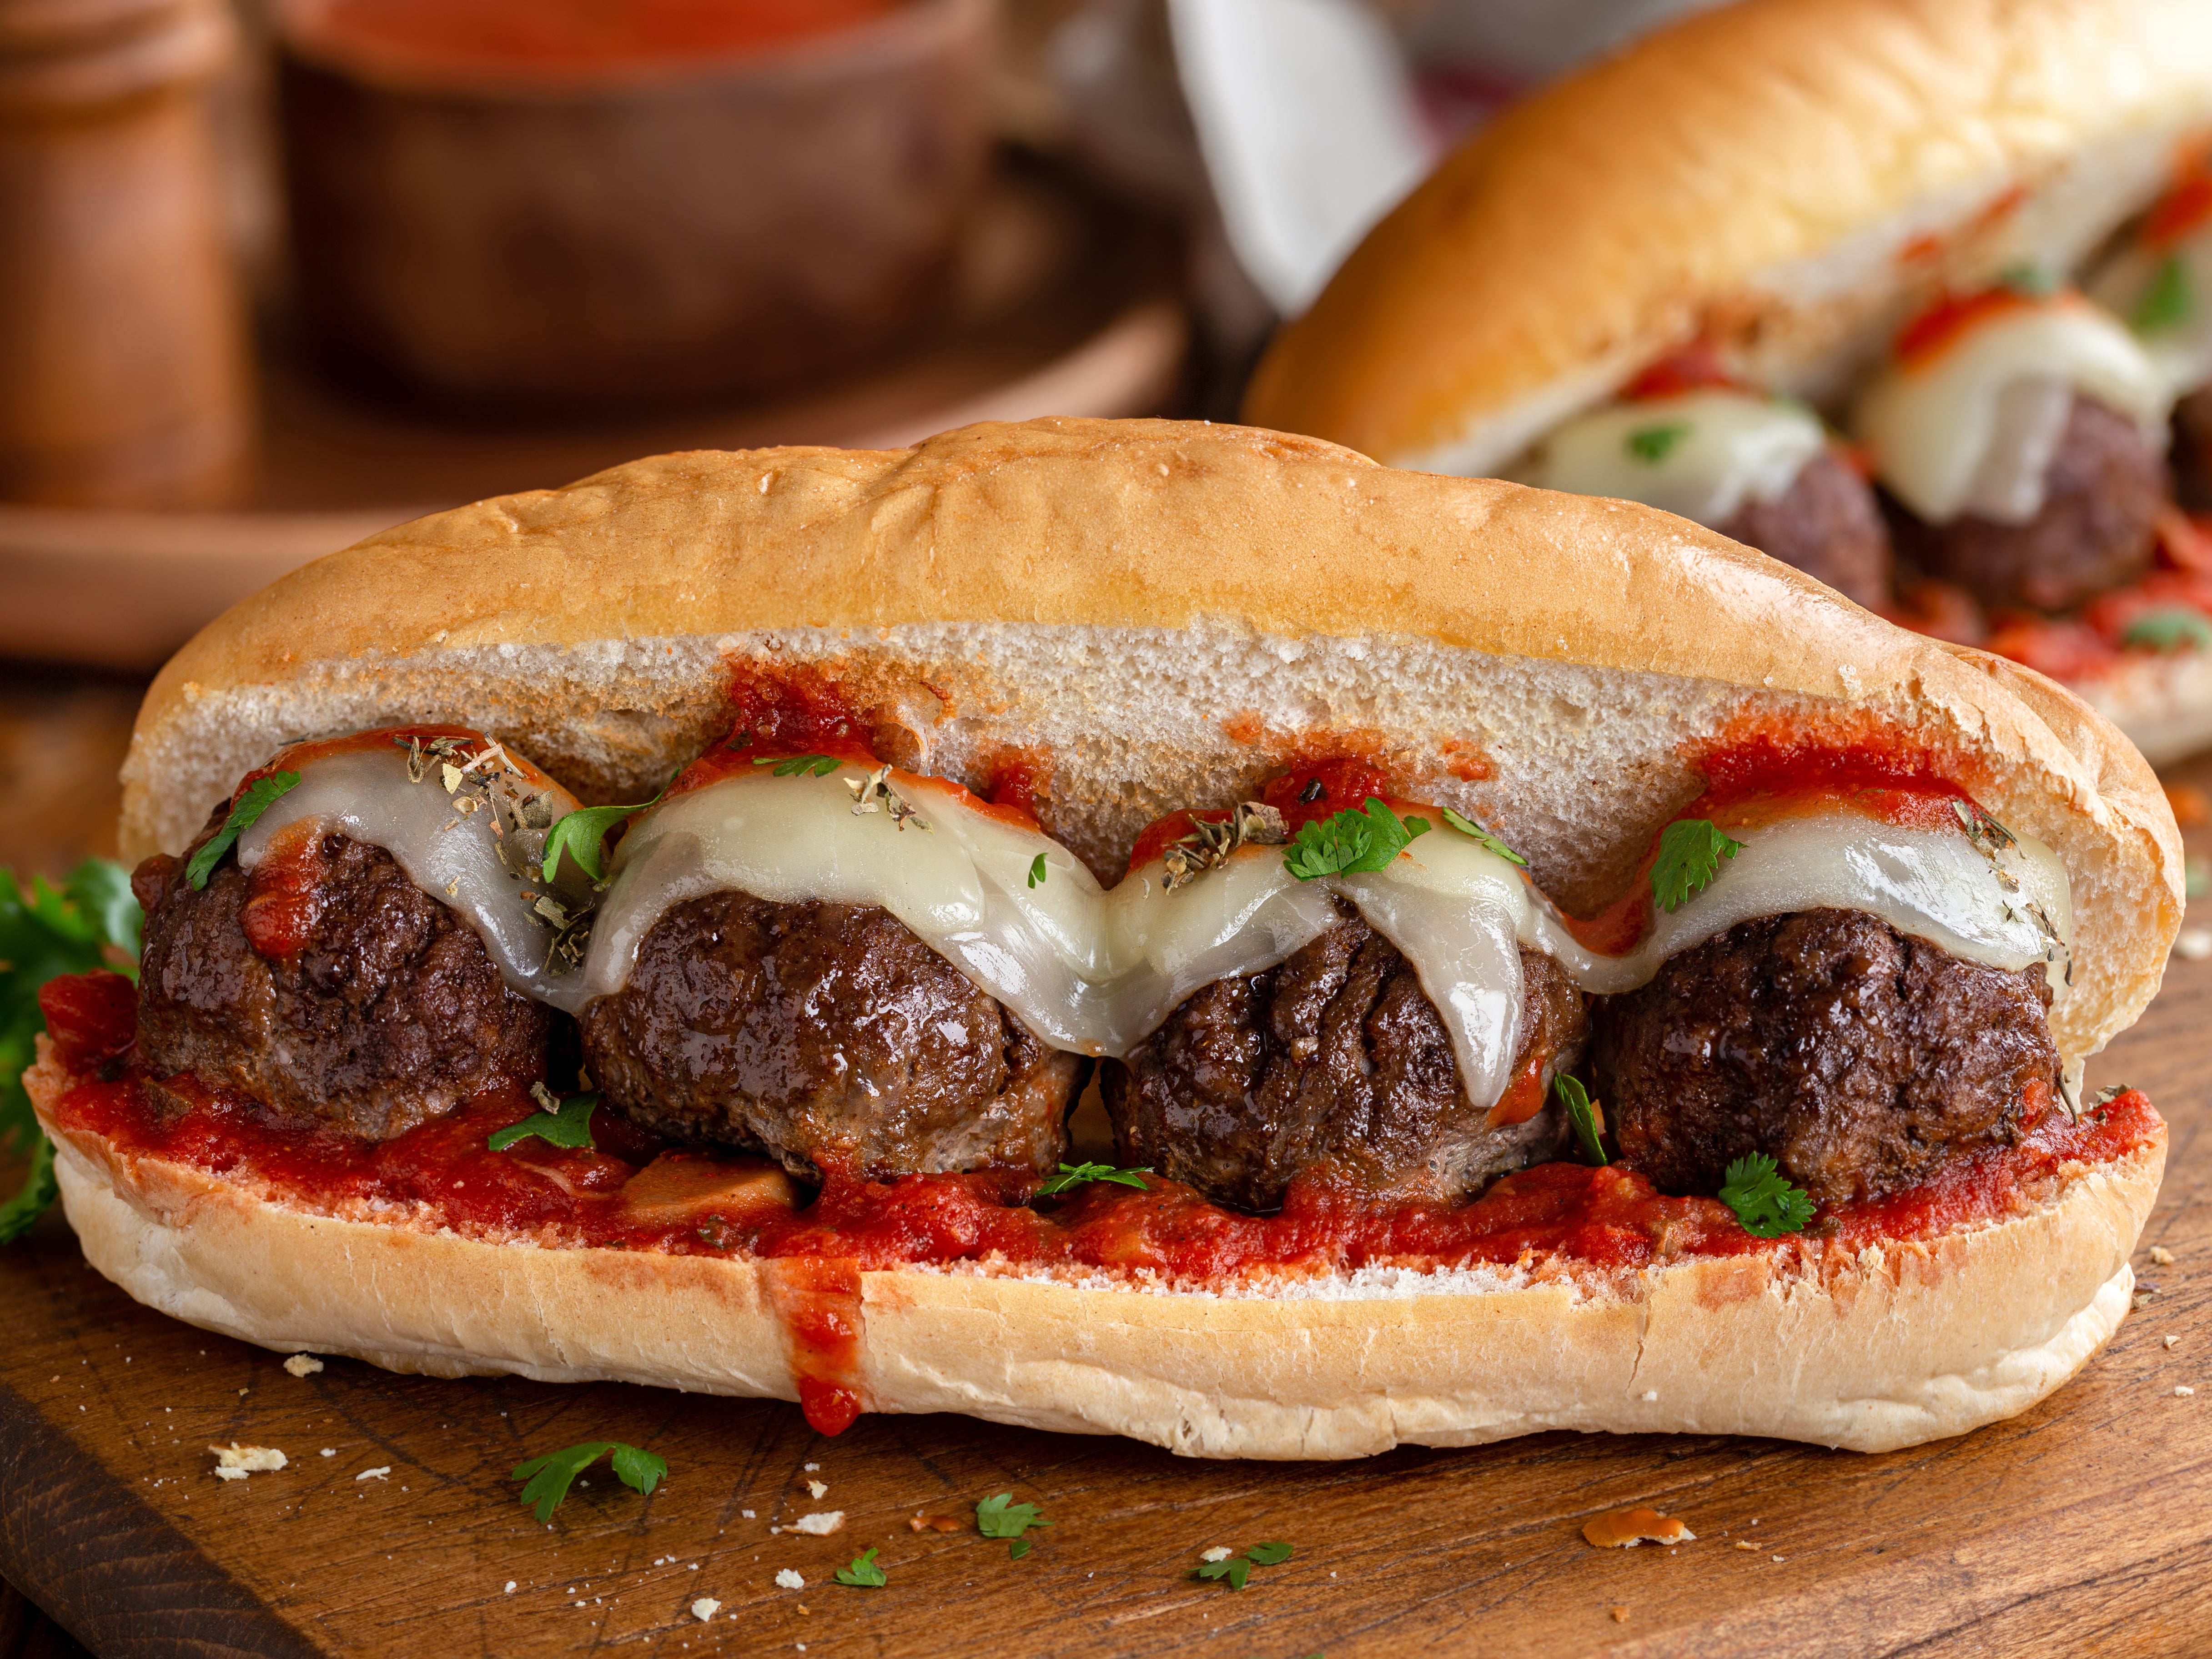 Meatball sub recipe in under 30 minutes